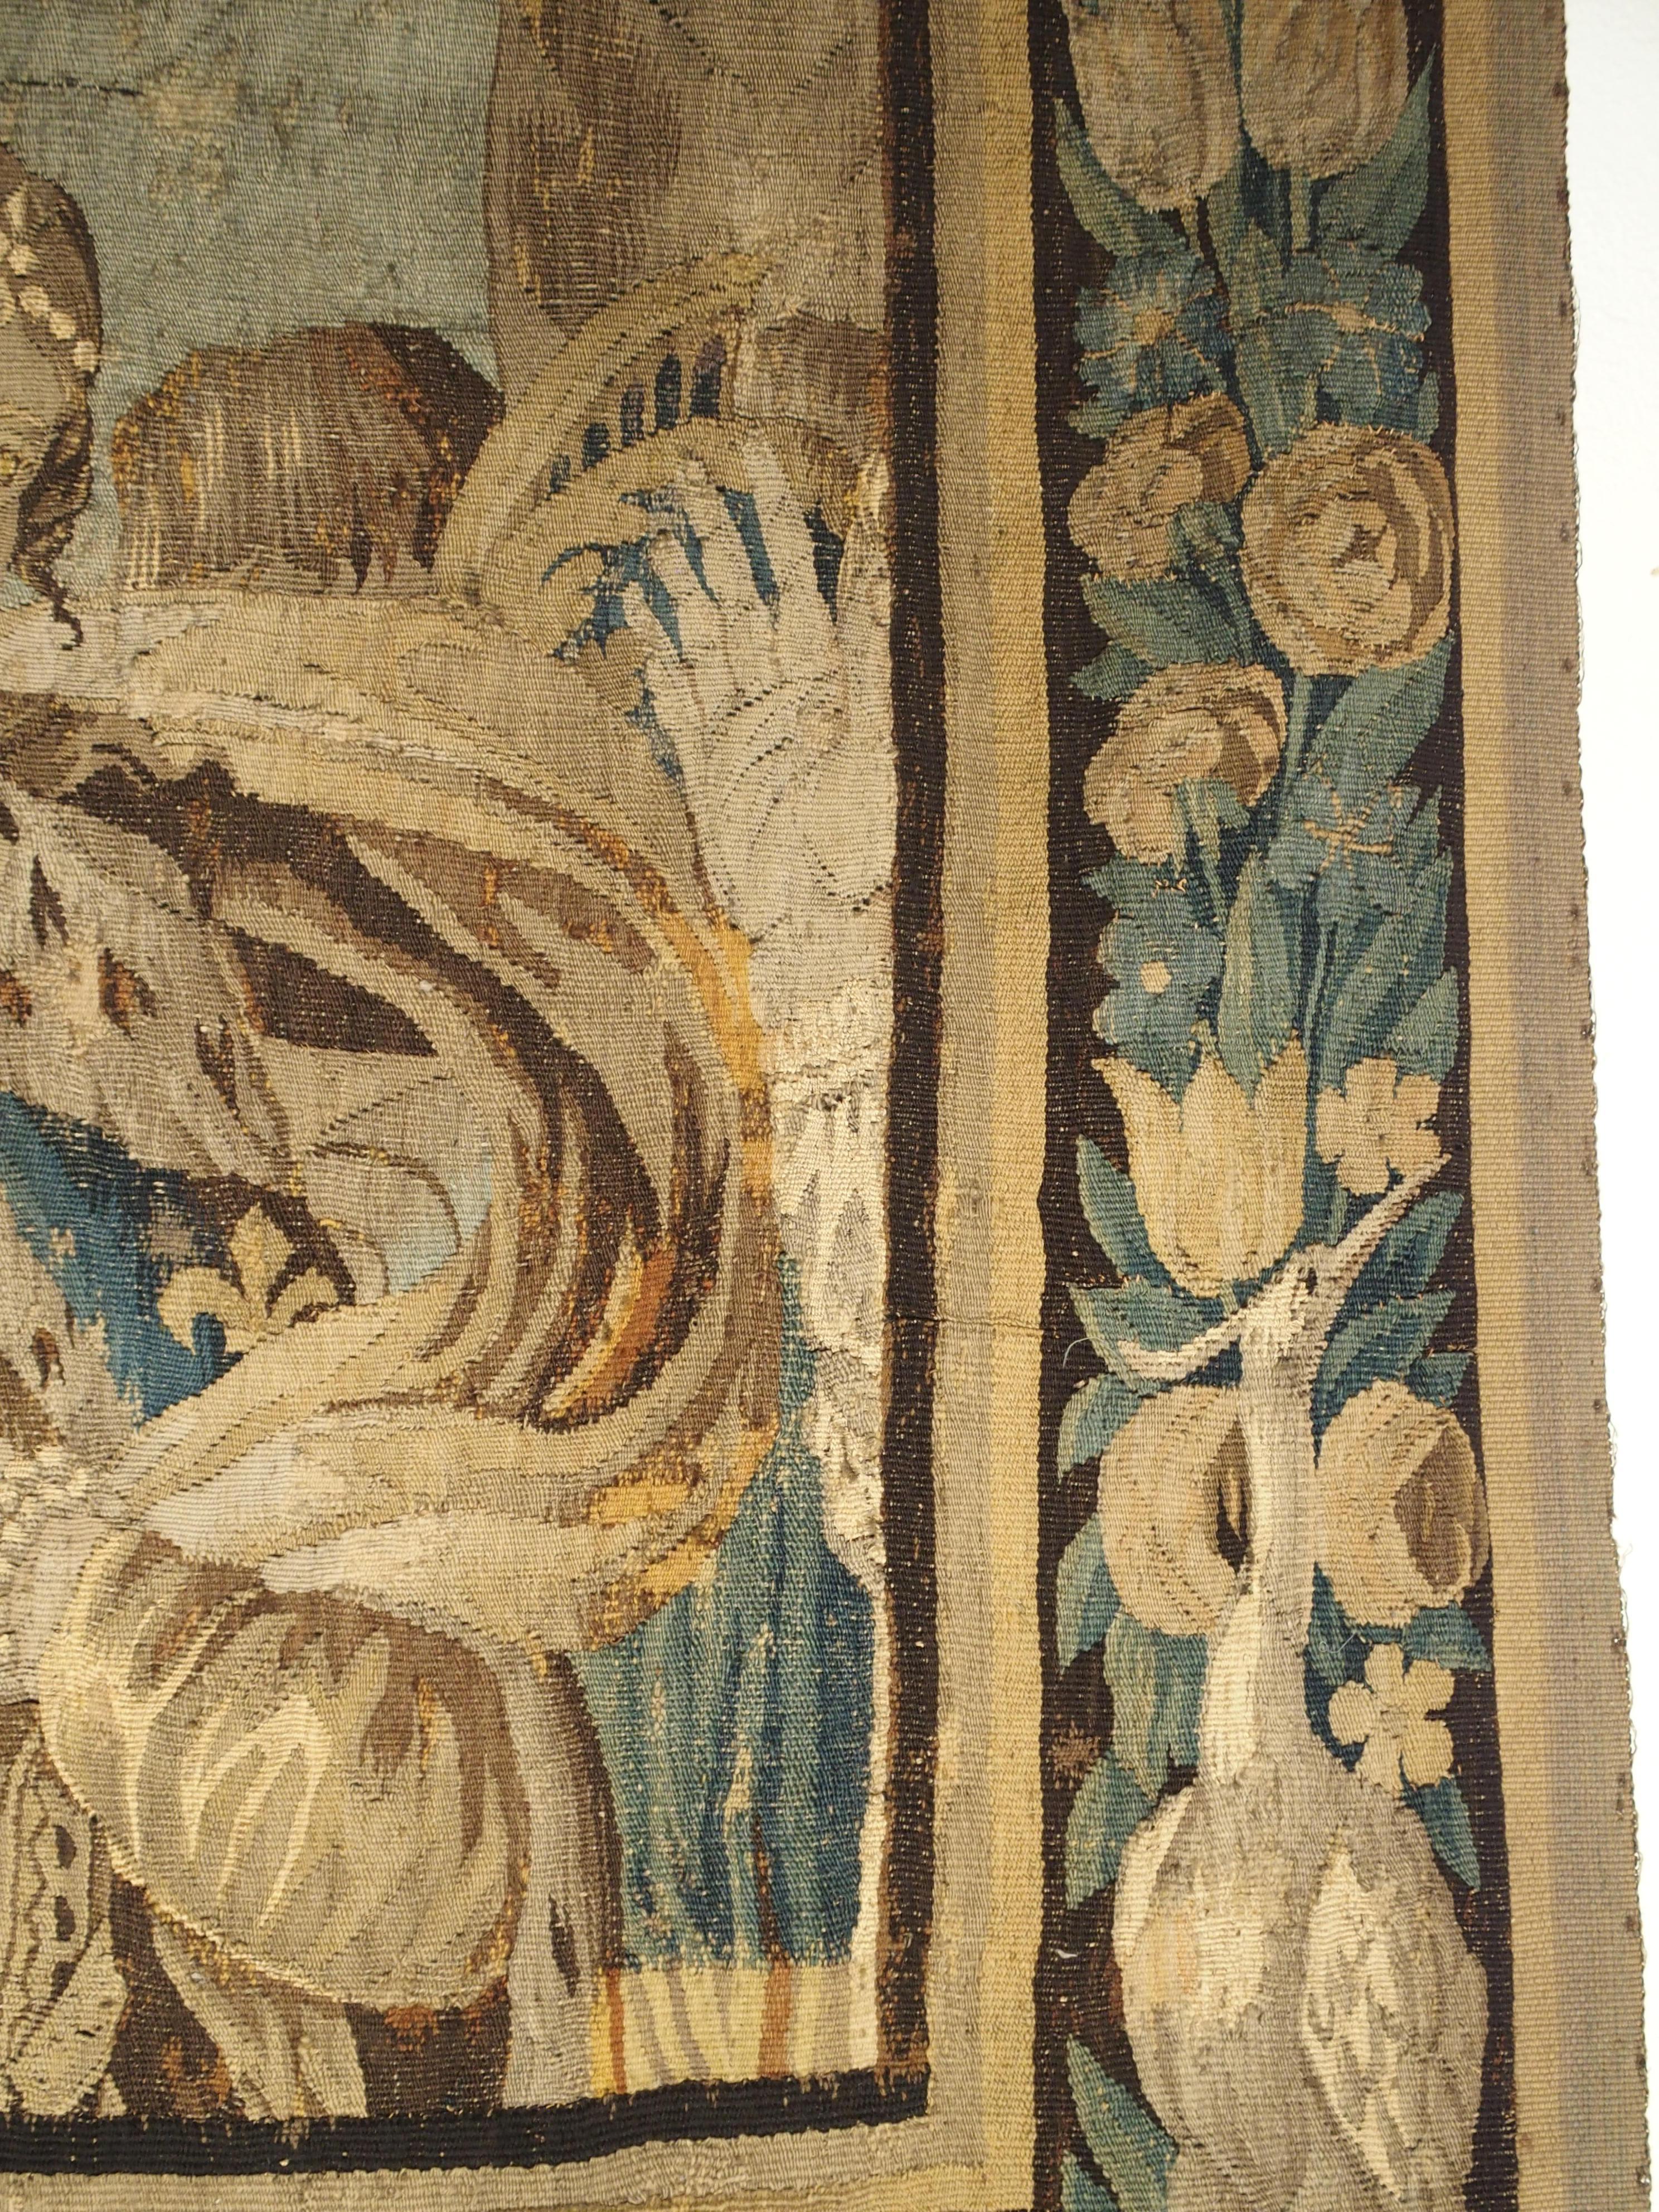 17th Century Tapestry Fragment with Ornate Border 5